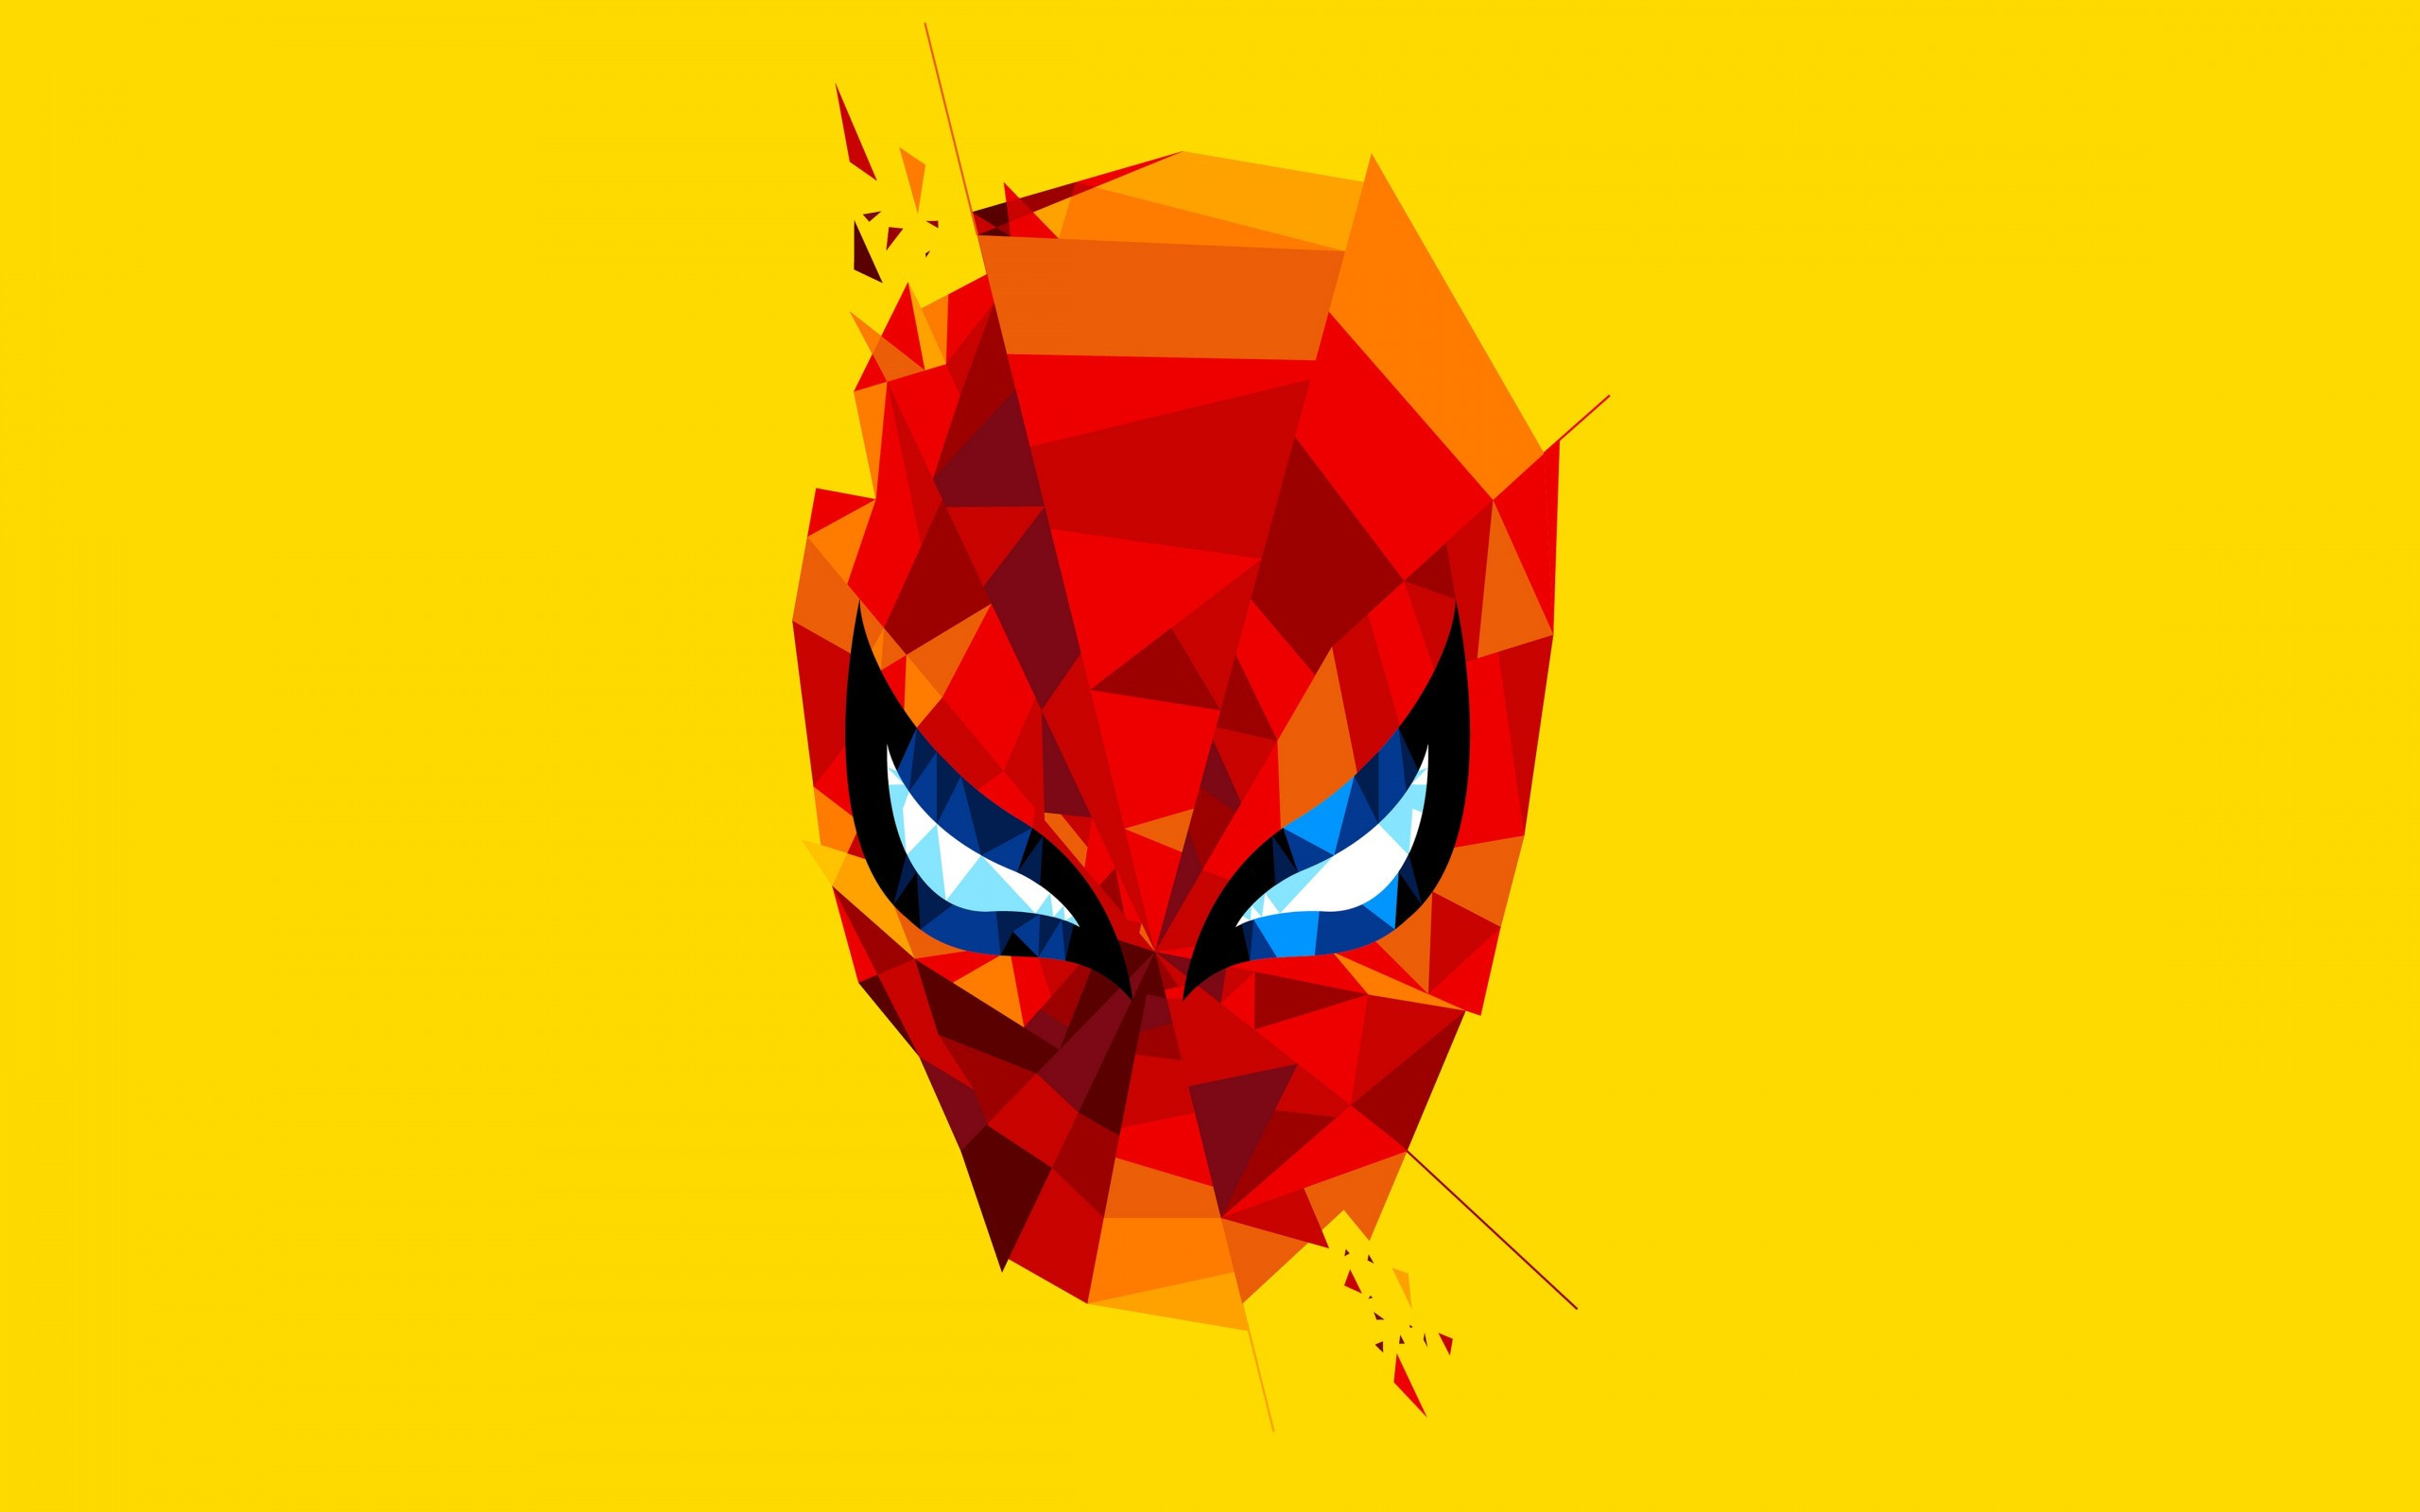 Download 2560x1600 Spider Man, Low Poly, Minimal Design, Head Wallpaper For MacBook Pro 13 Inch